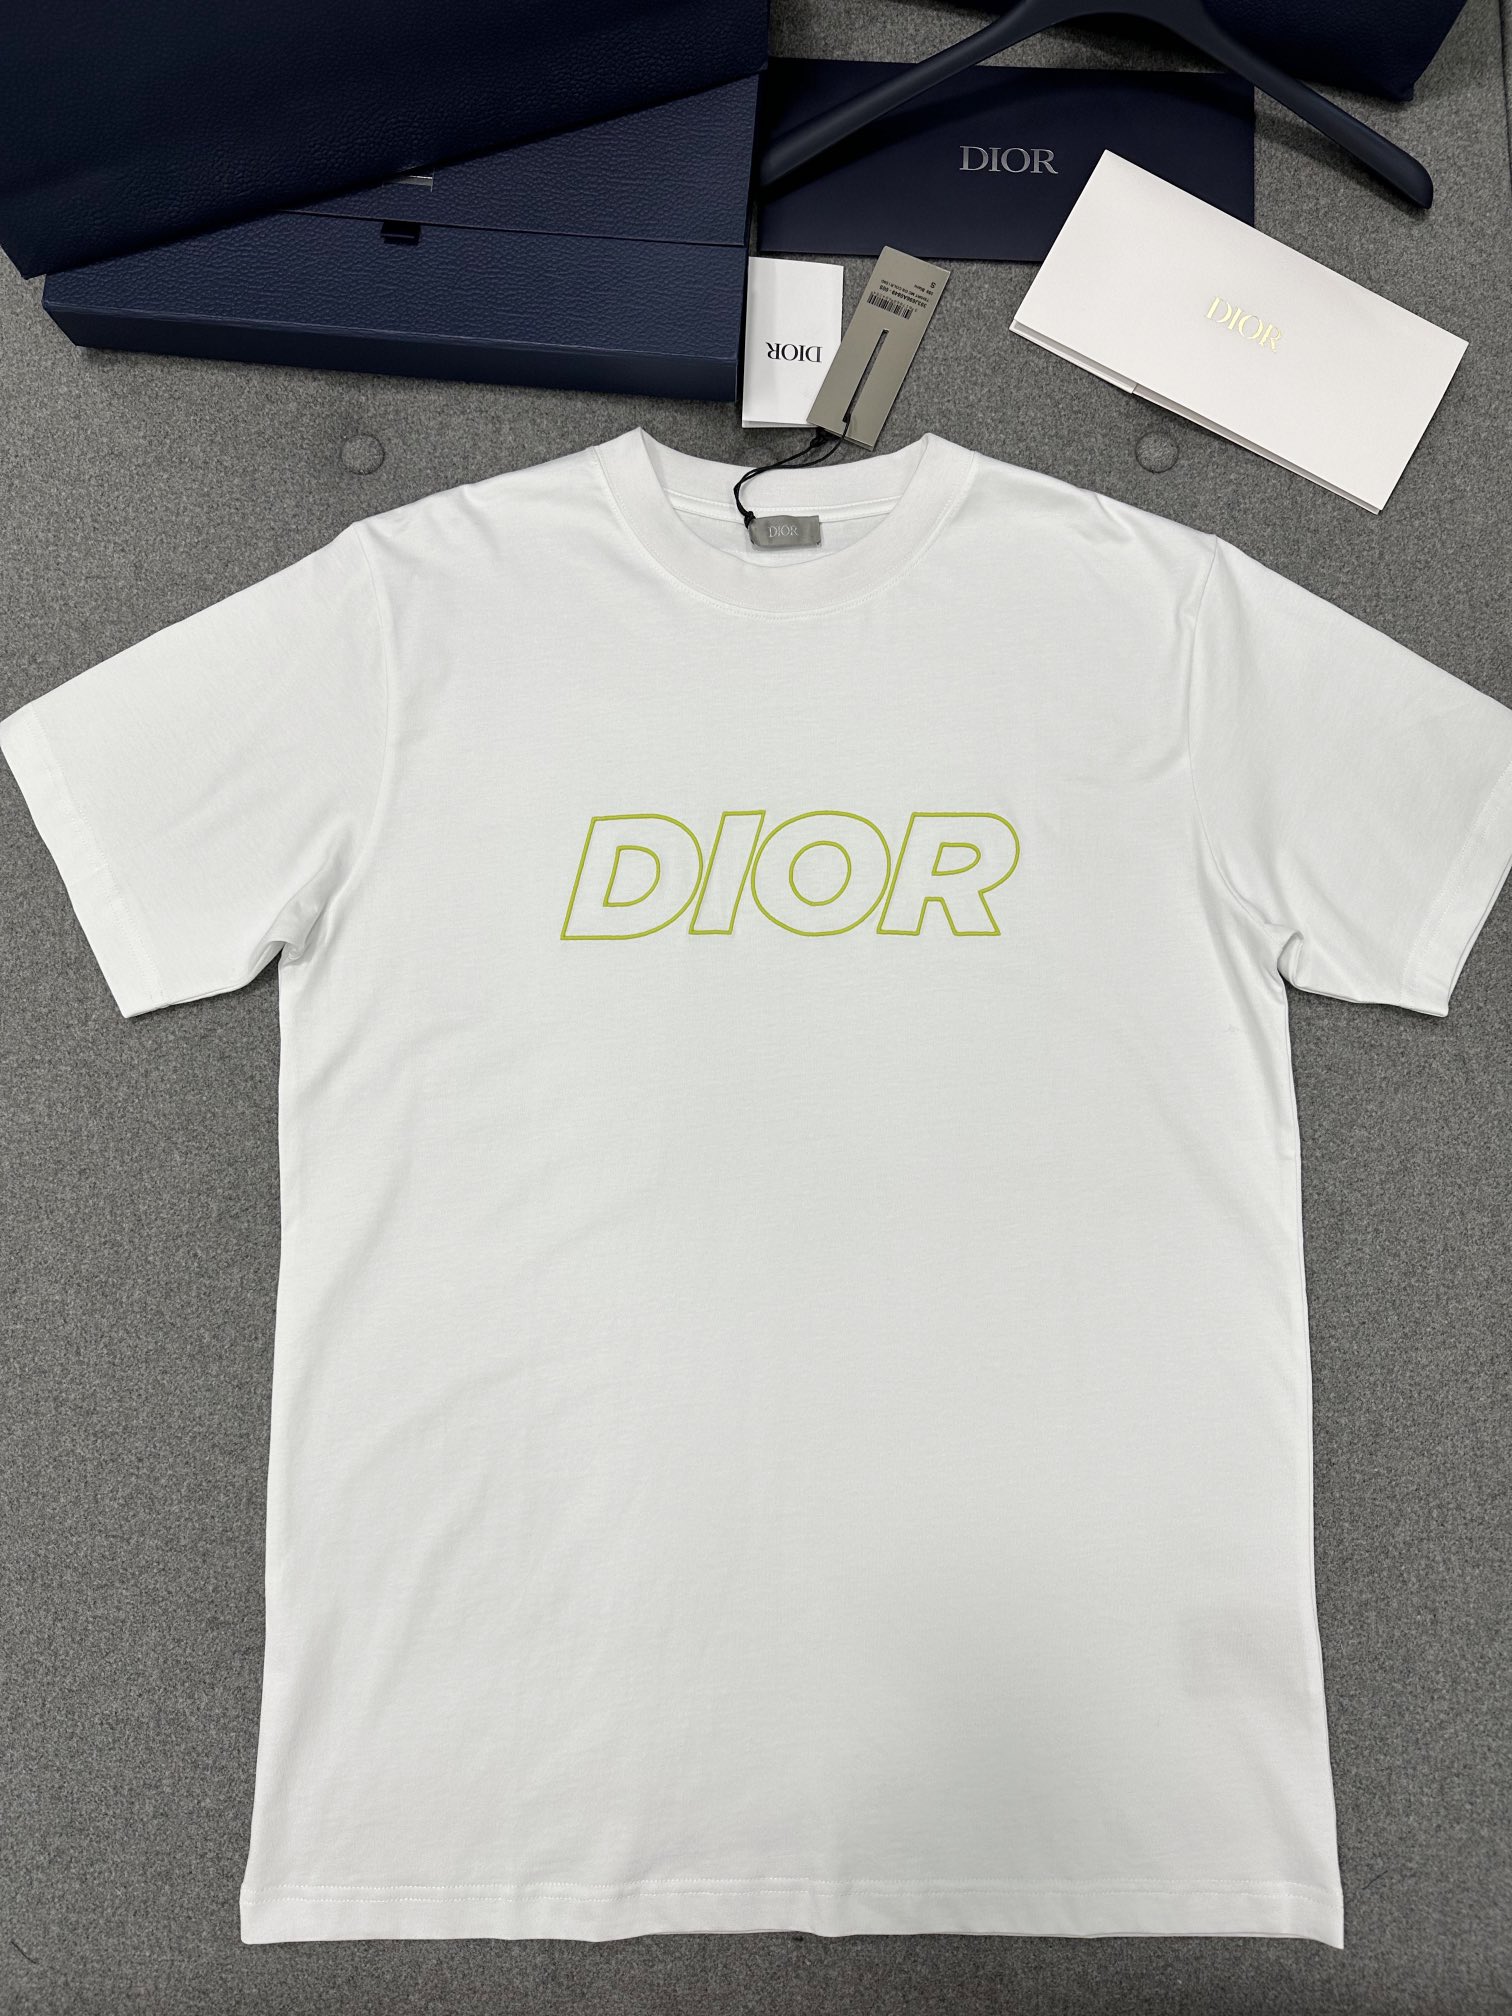 Dior Clothing T-Shirt White Embroidery Men Cotton Fall/Winter Collection Beach